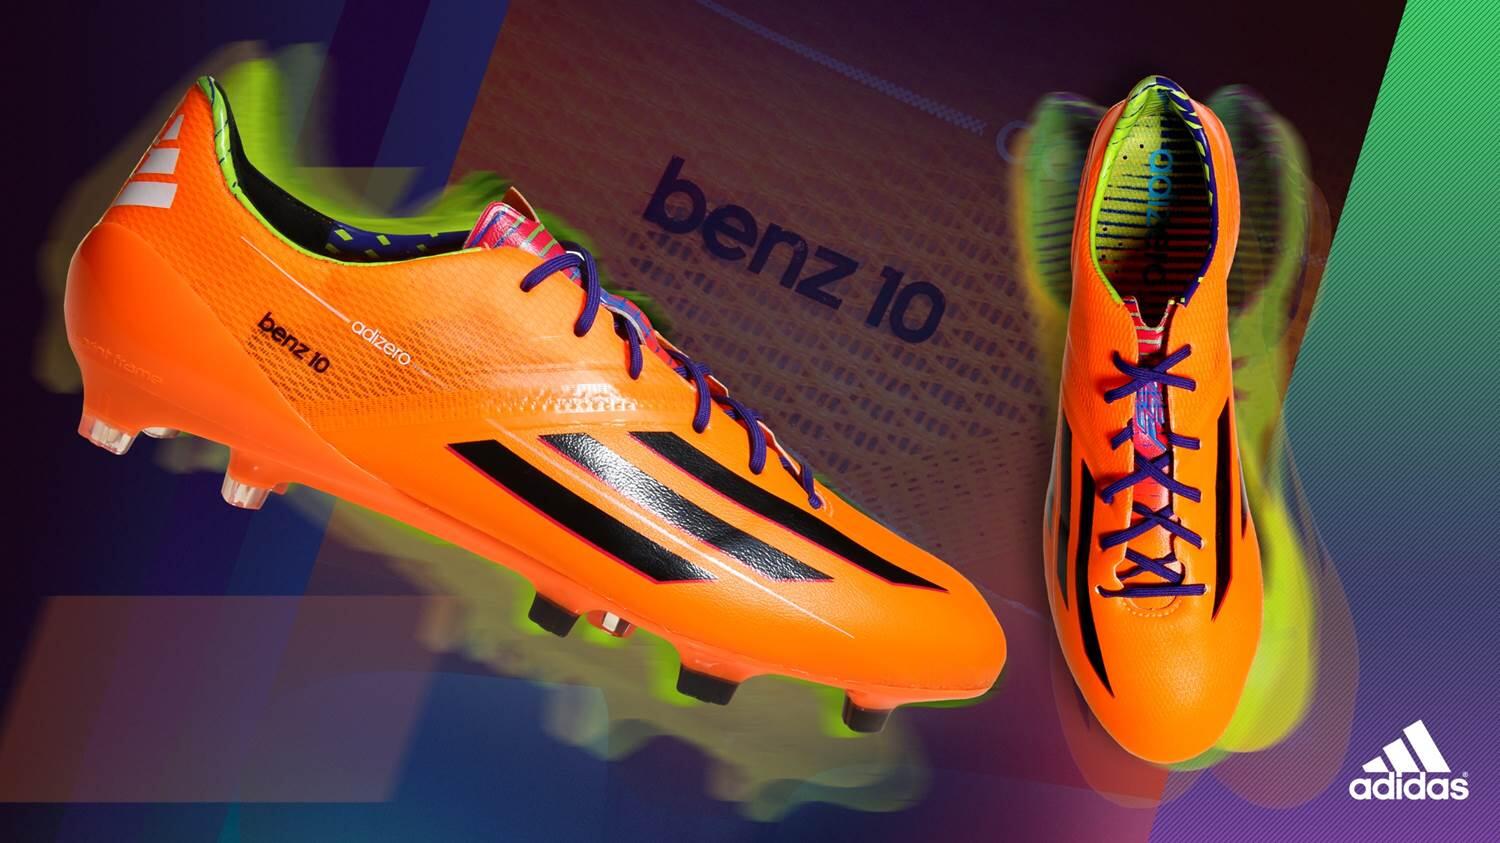 Twitter 上的 adidas Football："Fly or die Benzema! #F50 http://t.co/EXVxYCTqrV" /